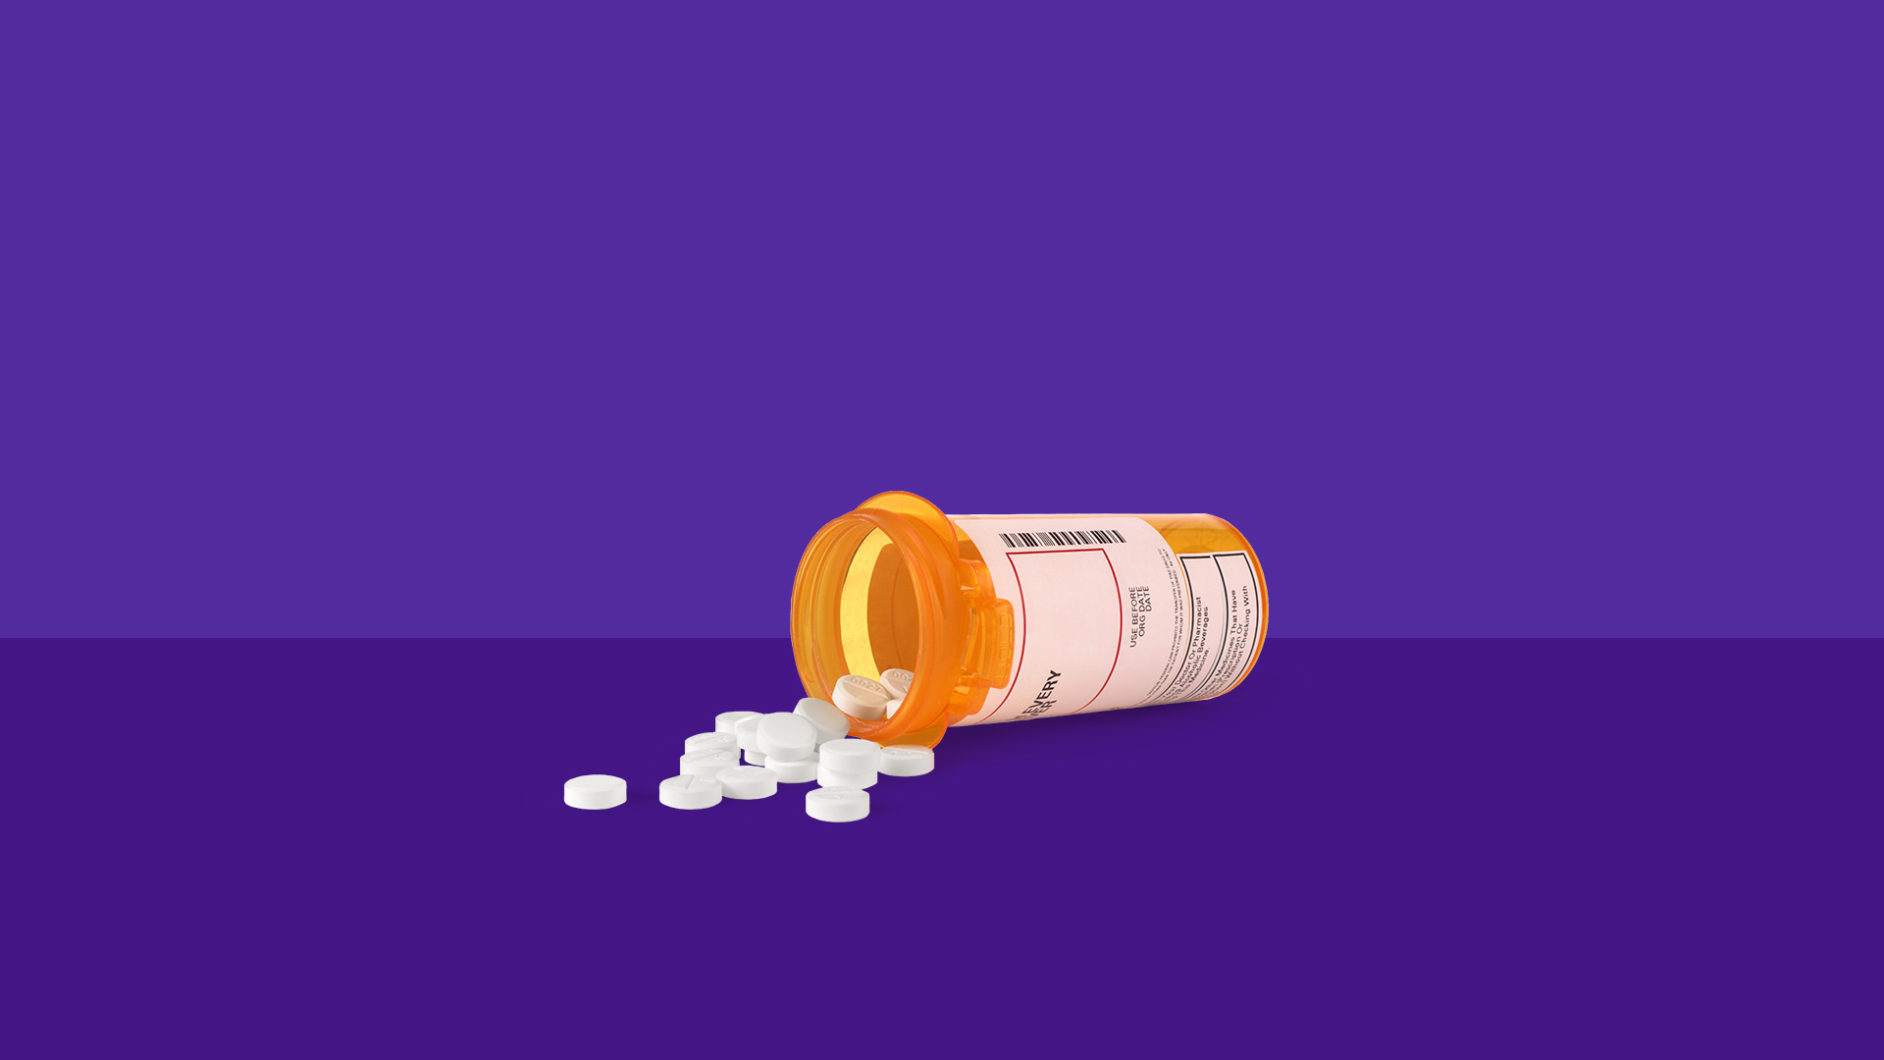 Spilled prescription bottle of pills: Compare common and serious lithium side effects